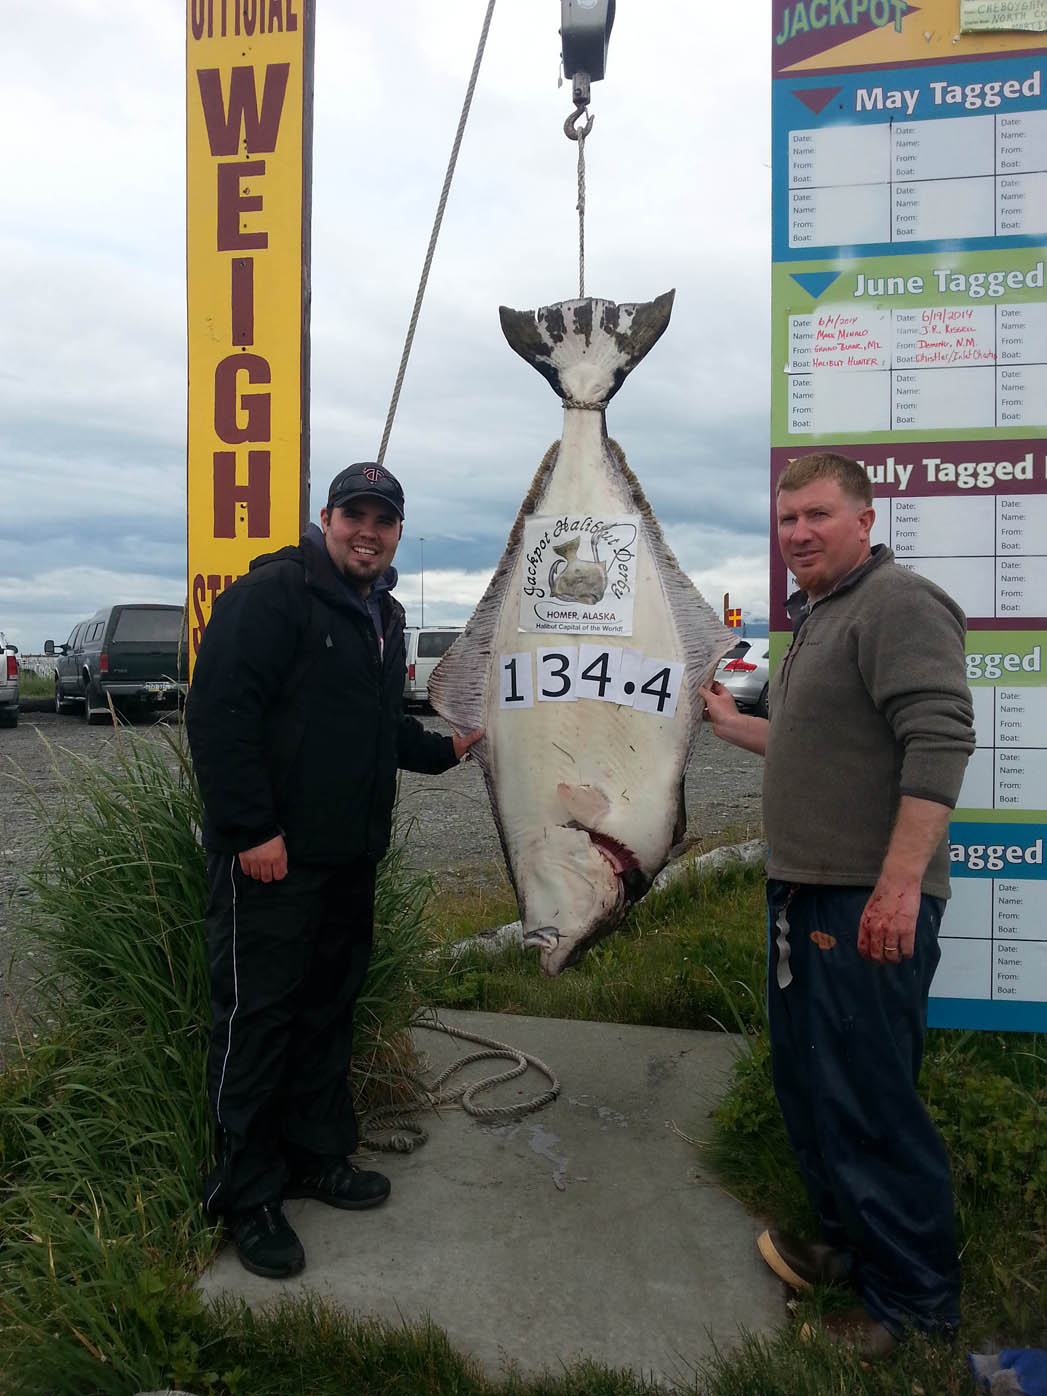 Sean hoffbeck of Kenai, left, caught this 134.4-pound halibut Sunday while fishing with Capt. Gabe Linegar, right, of Drift Alaska Charters. -Photo provided